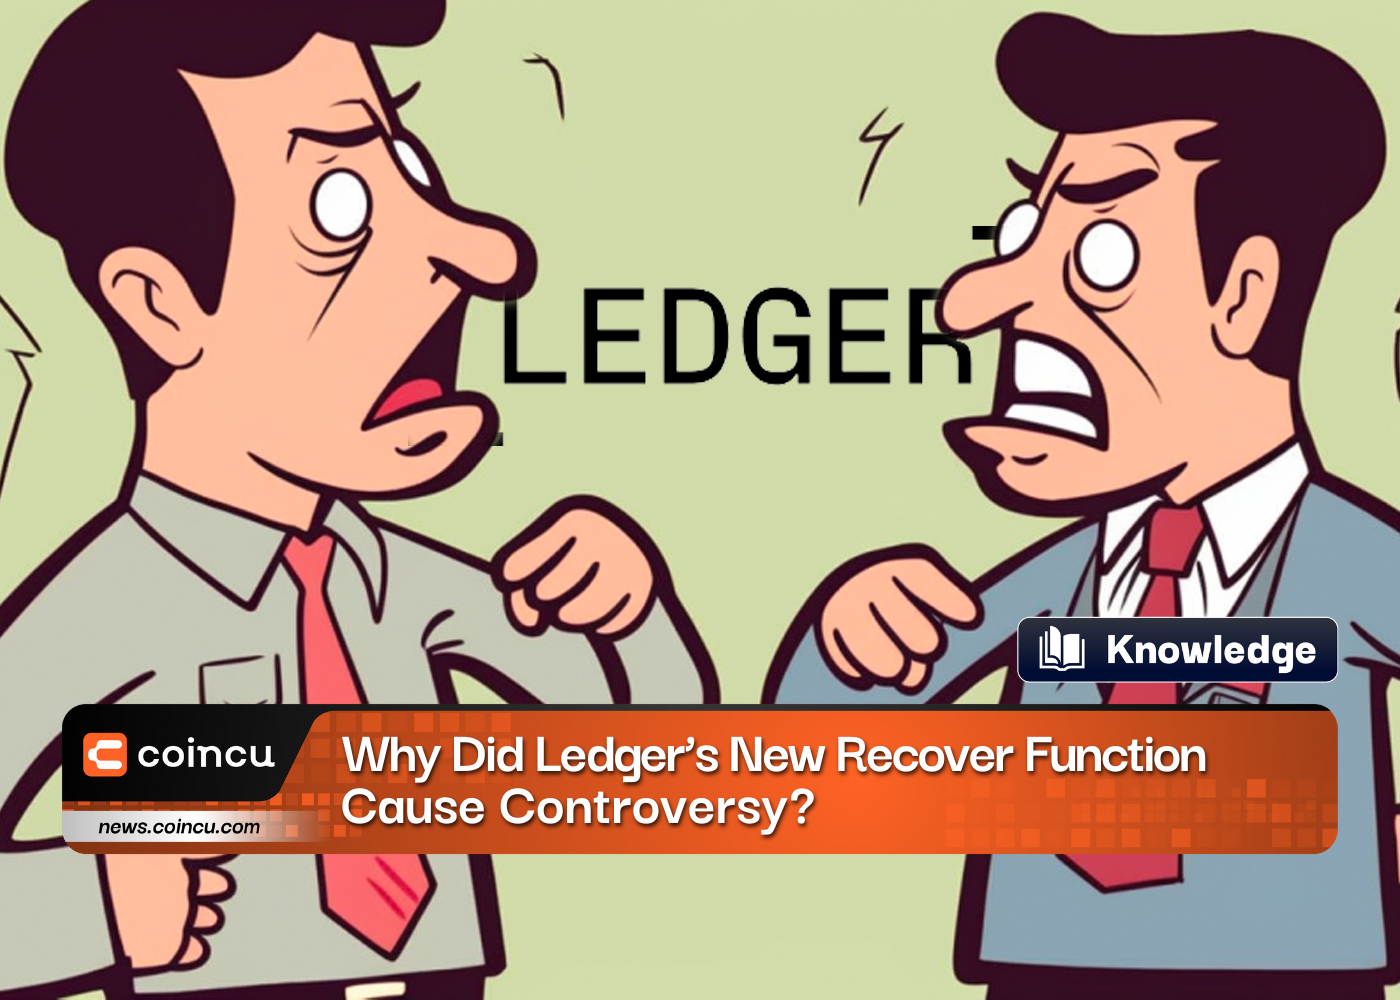 Why Did Ledger's New Recover Function Cause Controversy?